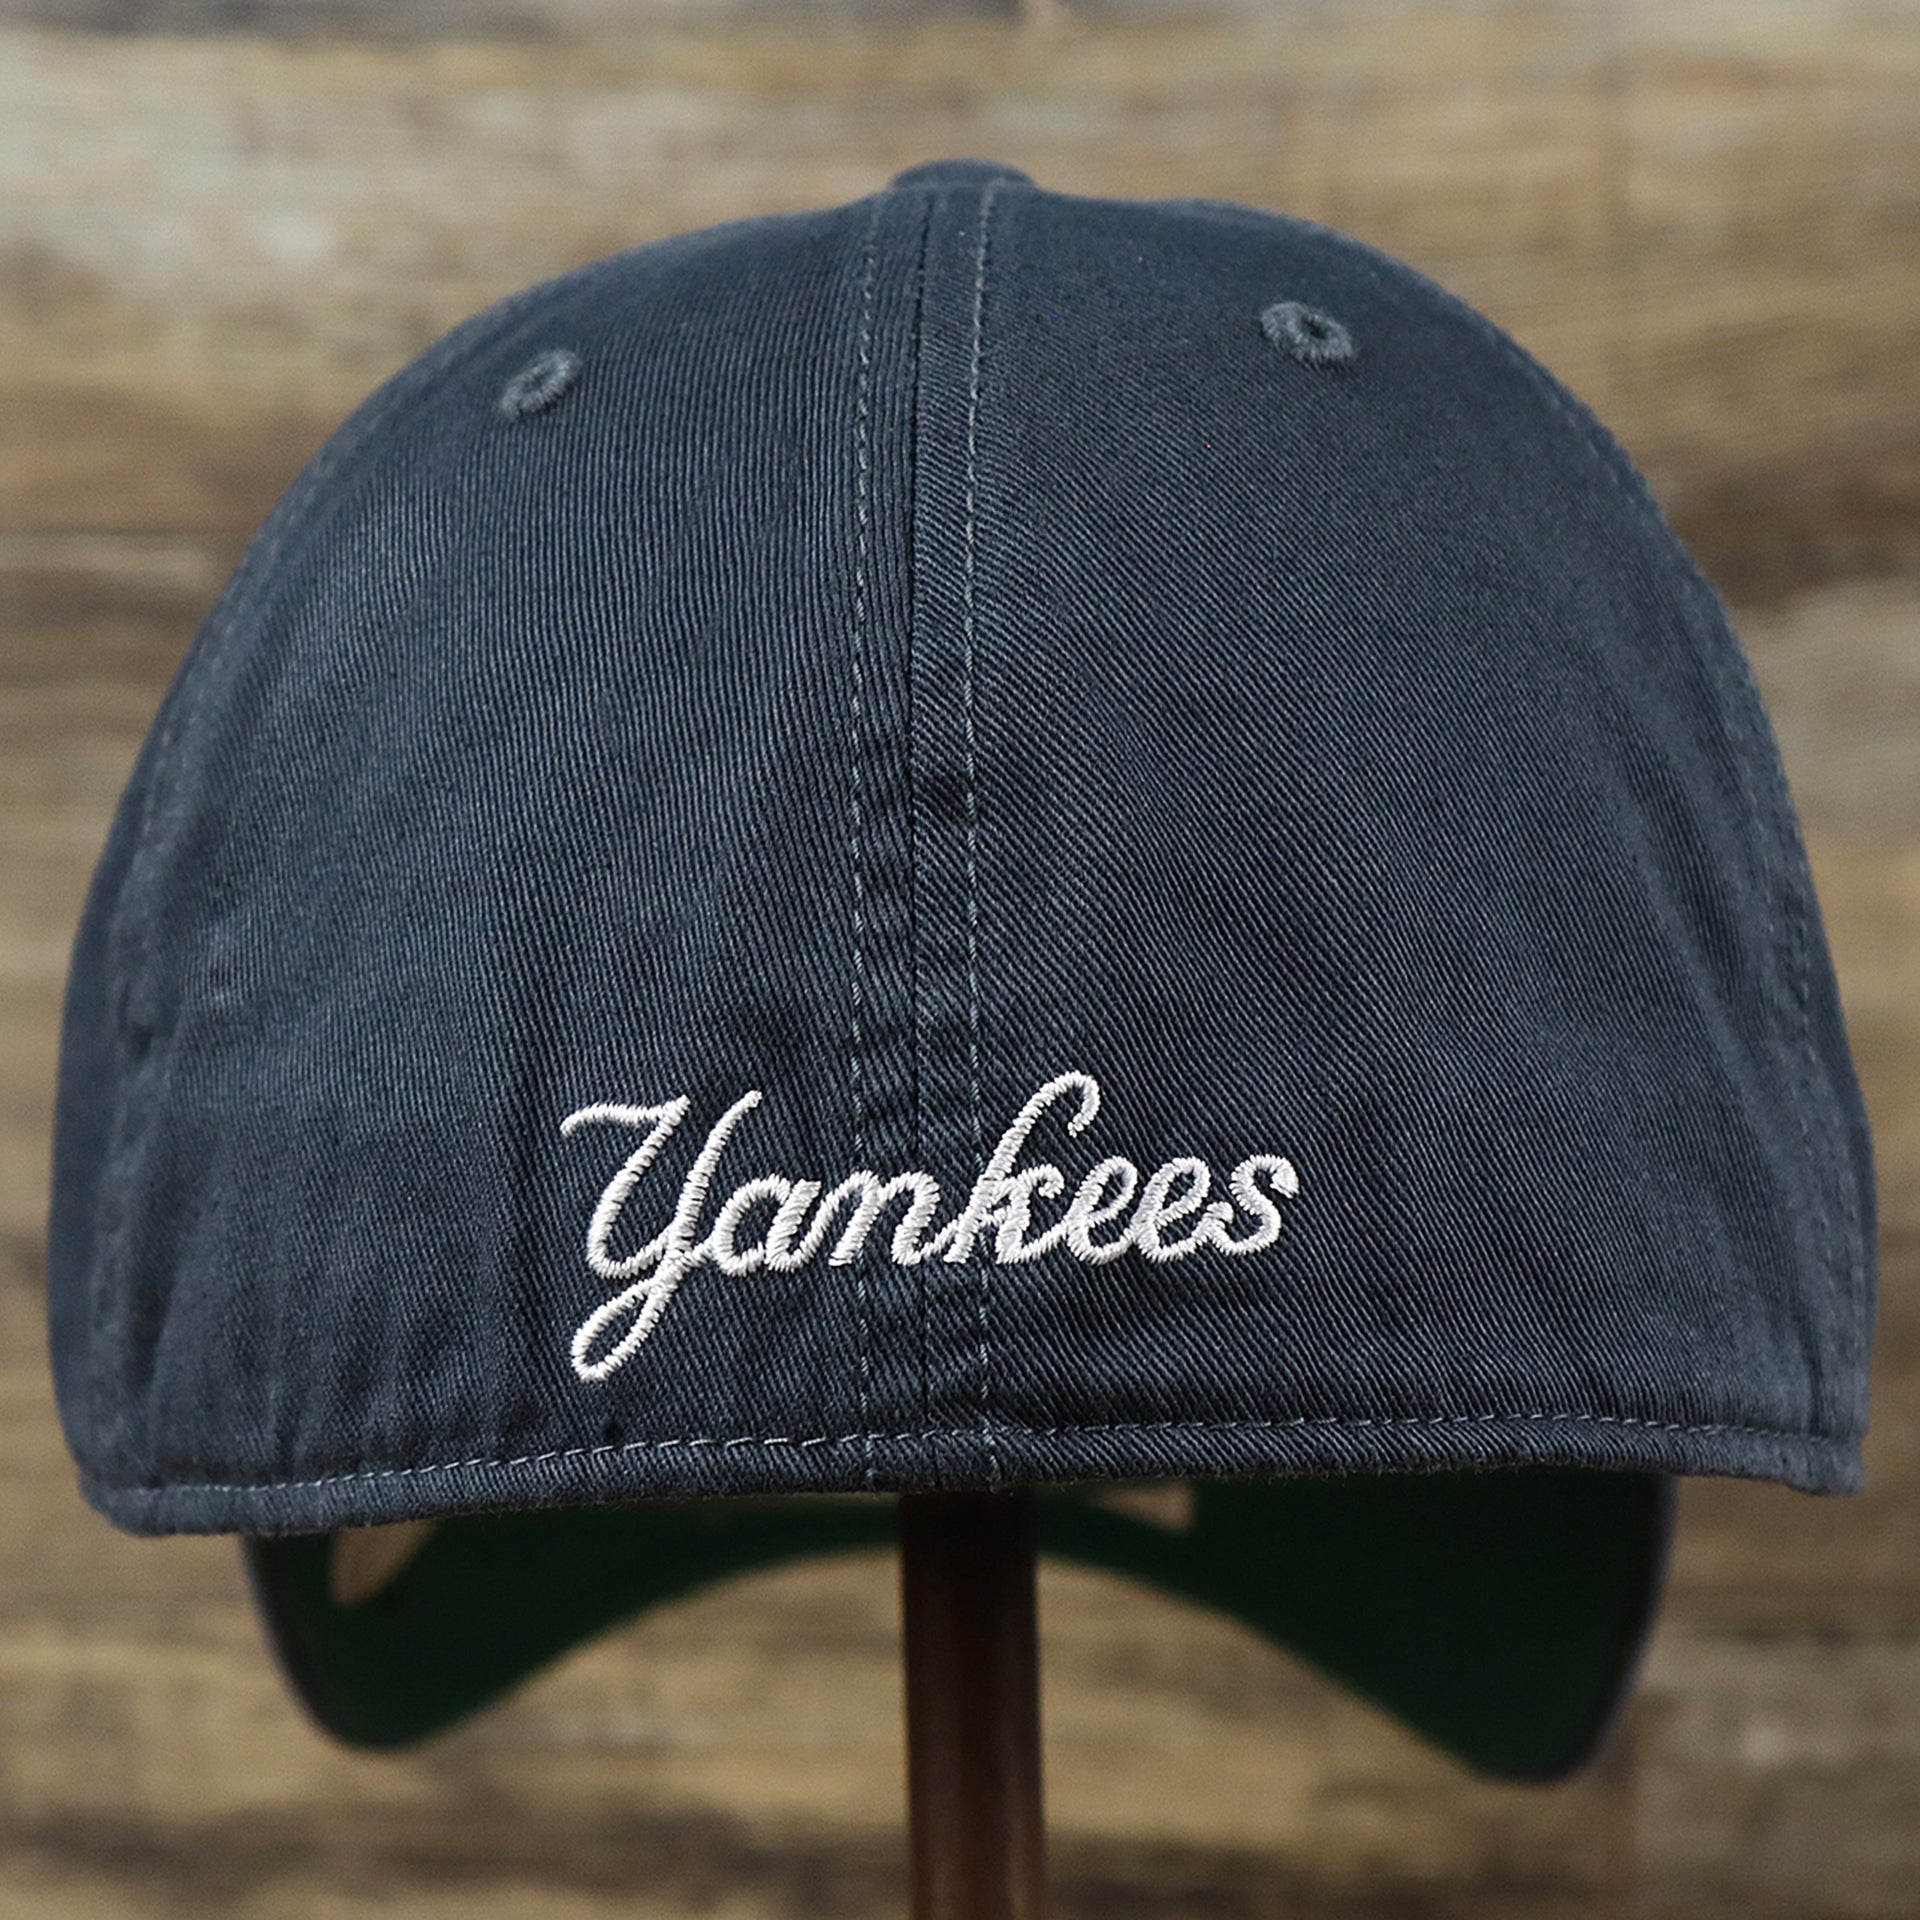 The backside of the Cooperstown New York Yankees Green Bottom Yankees Wordmark Fitted Cap | Vintage Navy Fitted Cap